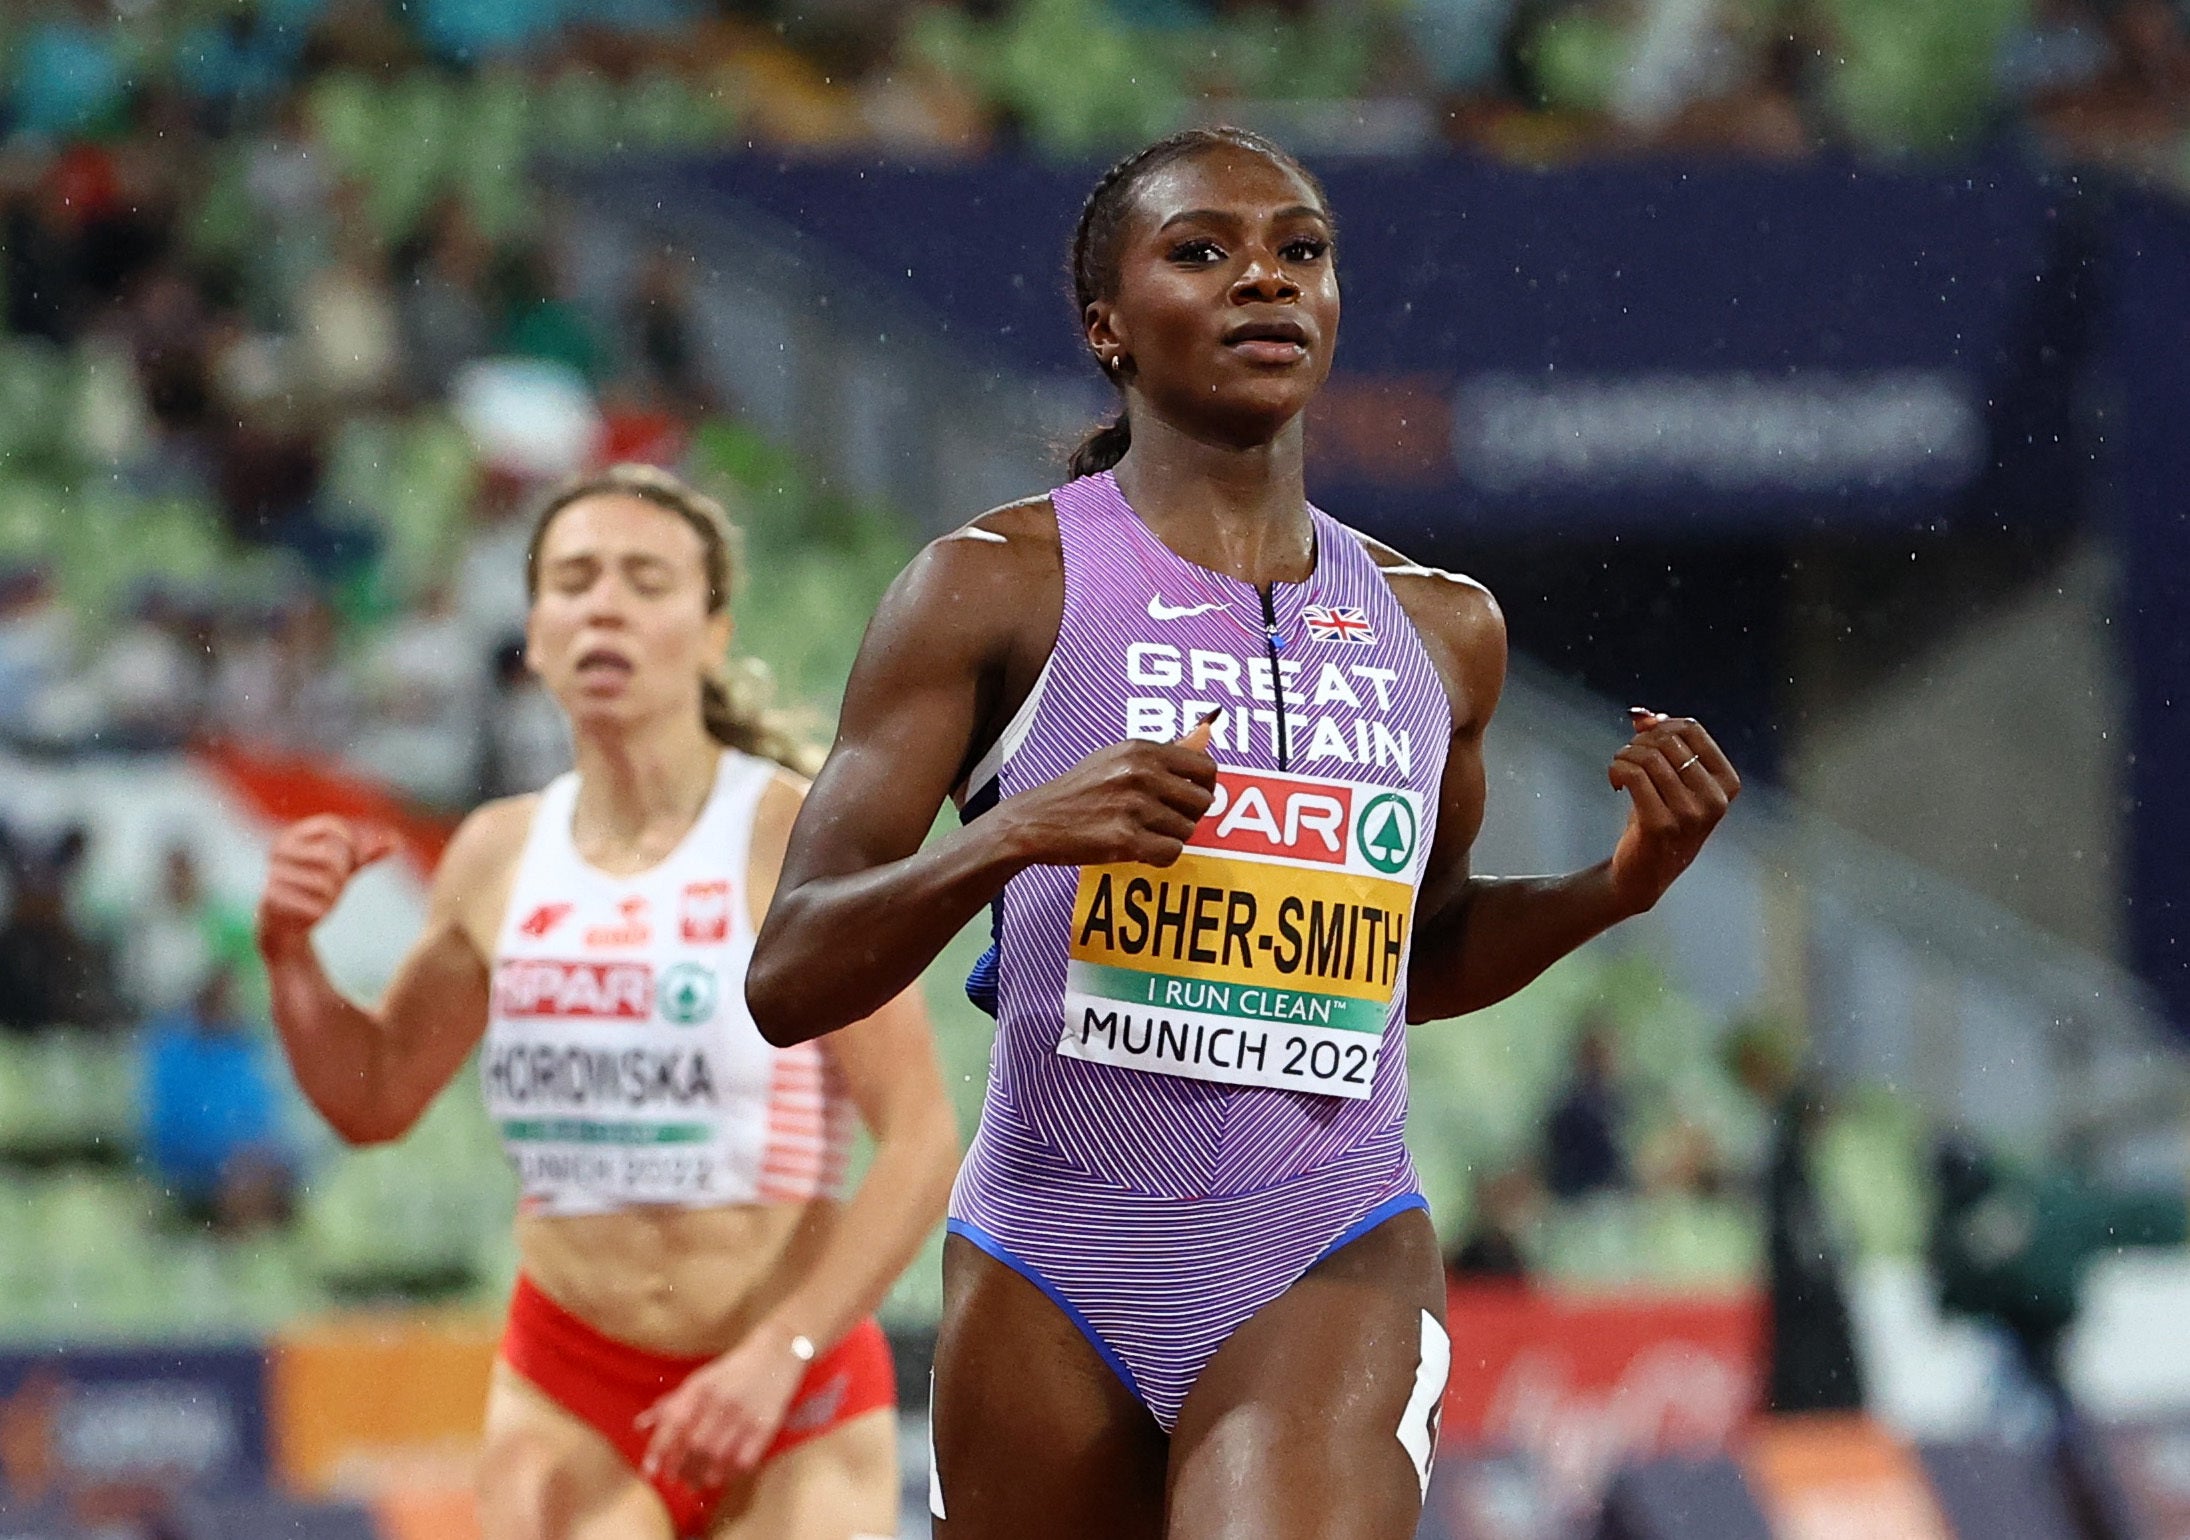 Asher-Smith revealed ‘girls’ stuff’ had caused calf cramps which forced her to pull up during the 100m final in Munich